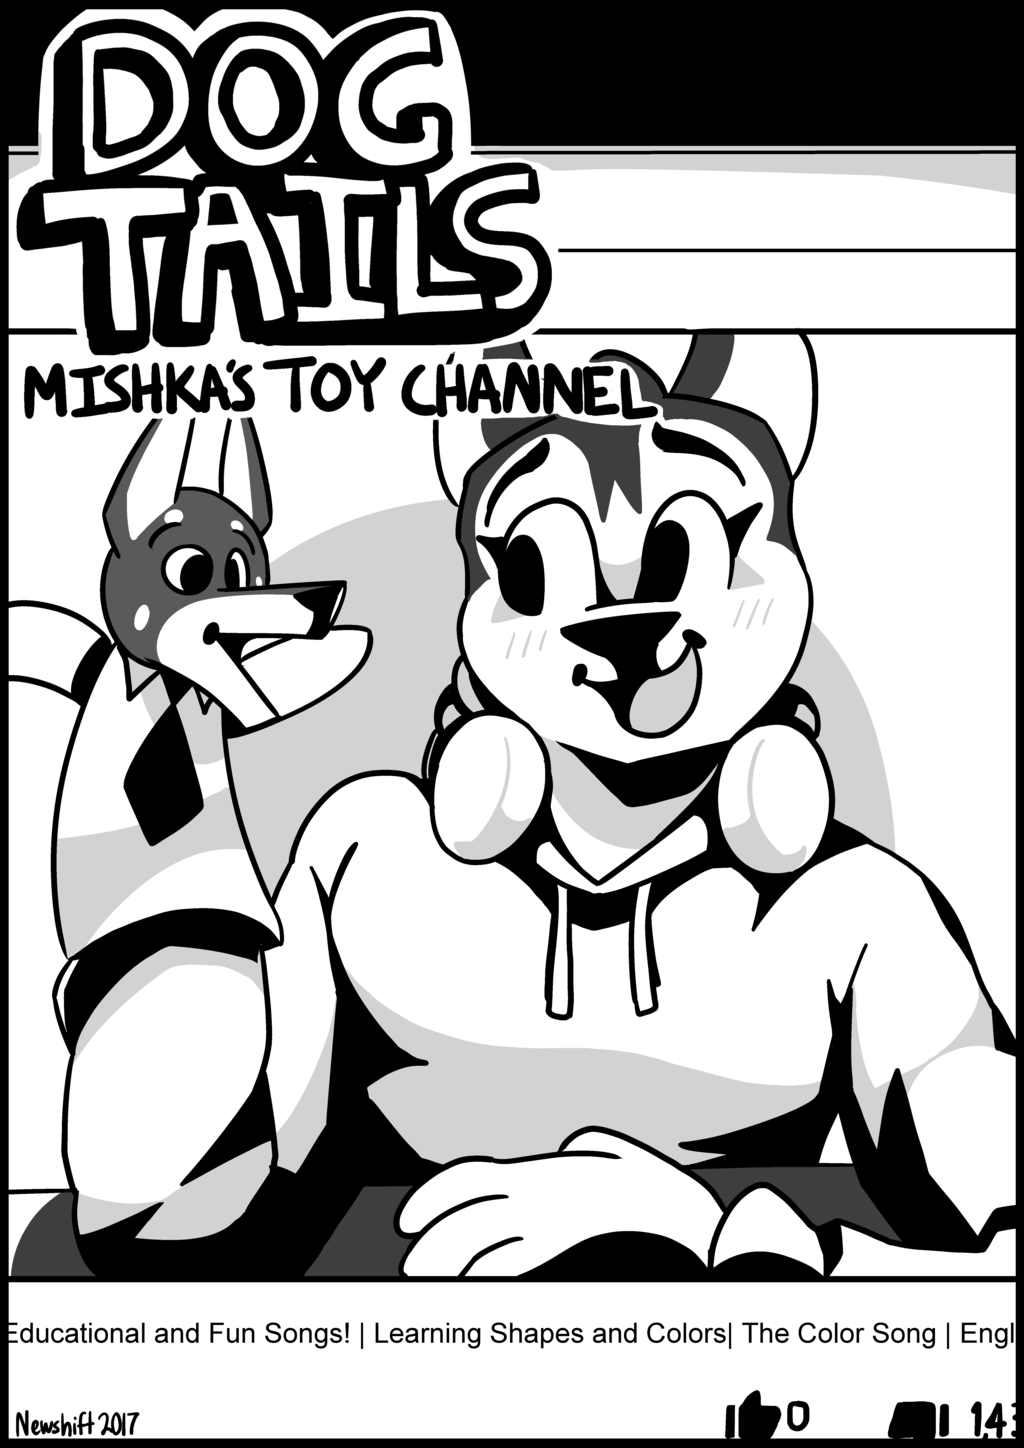 Dog Tails: Mishka's Toy Channel (Cover)